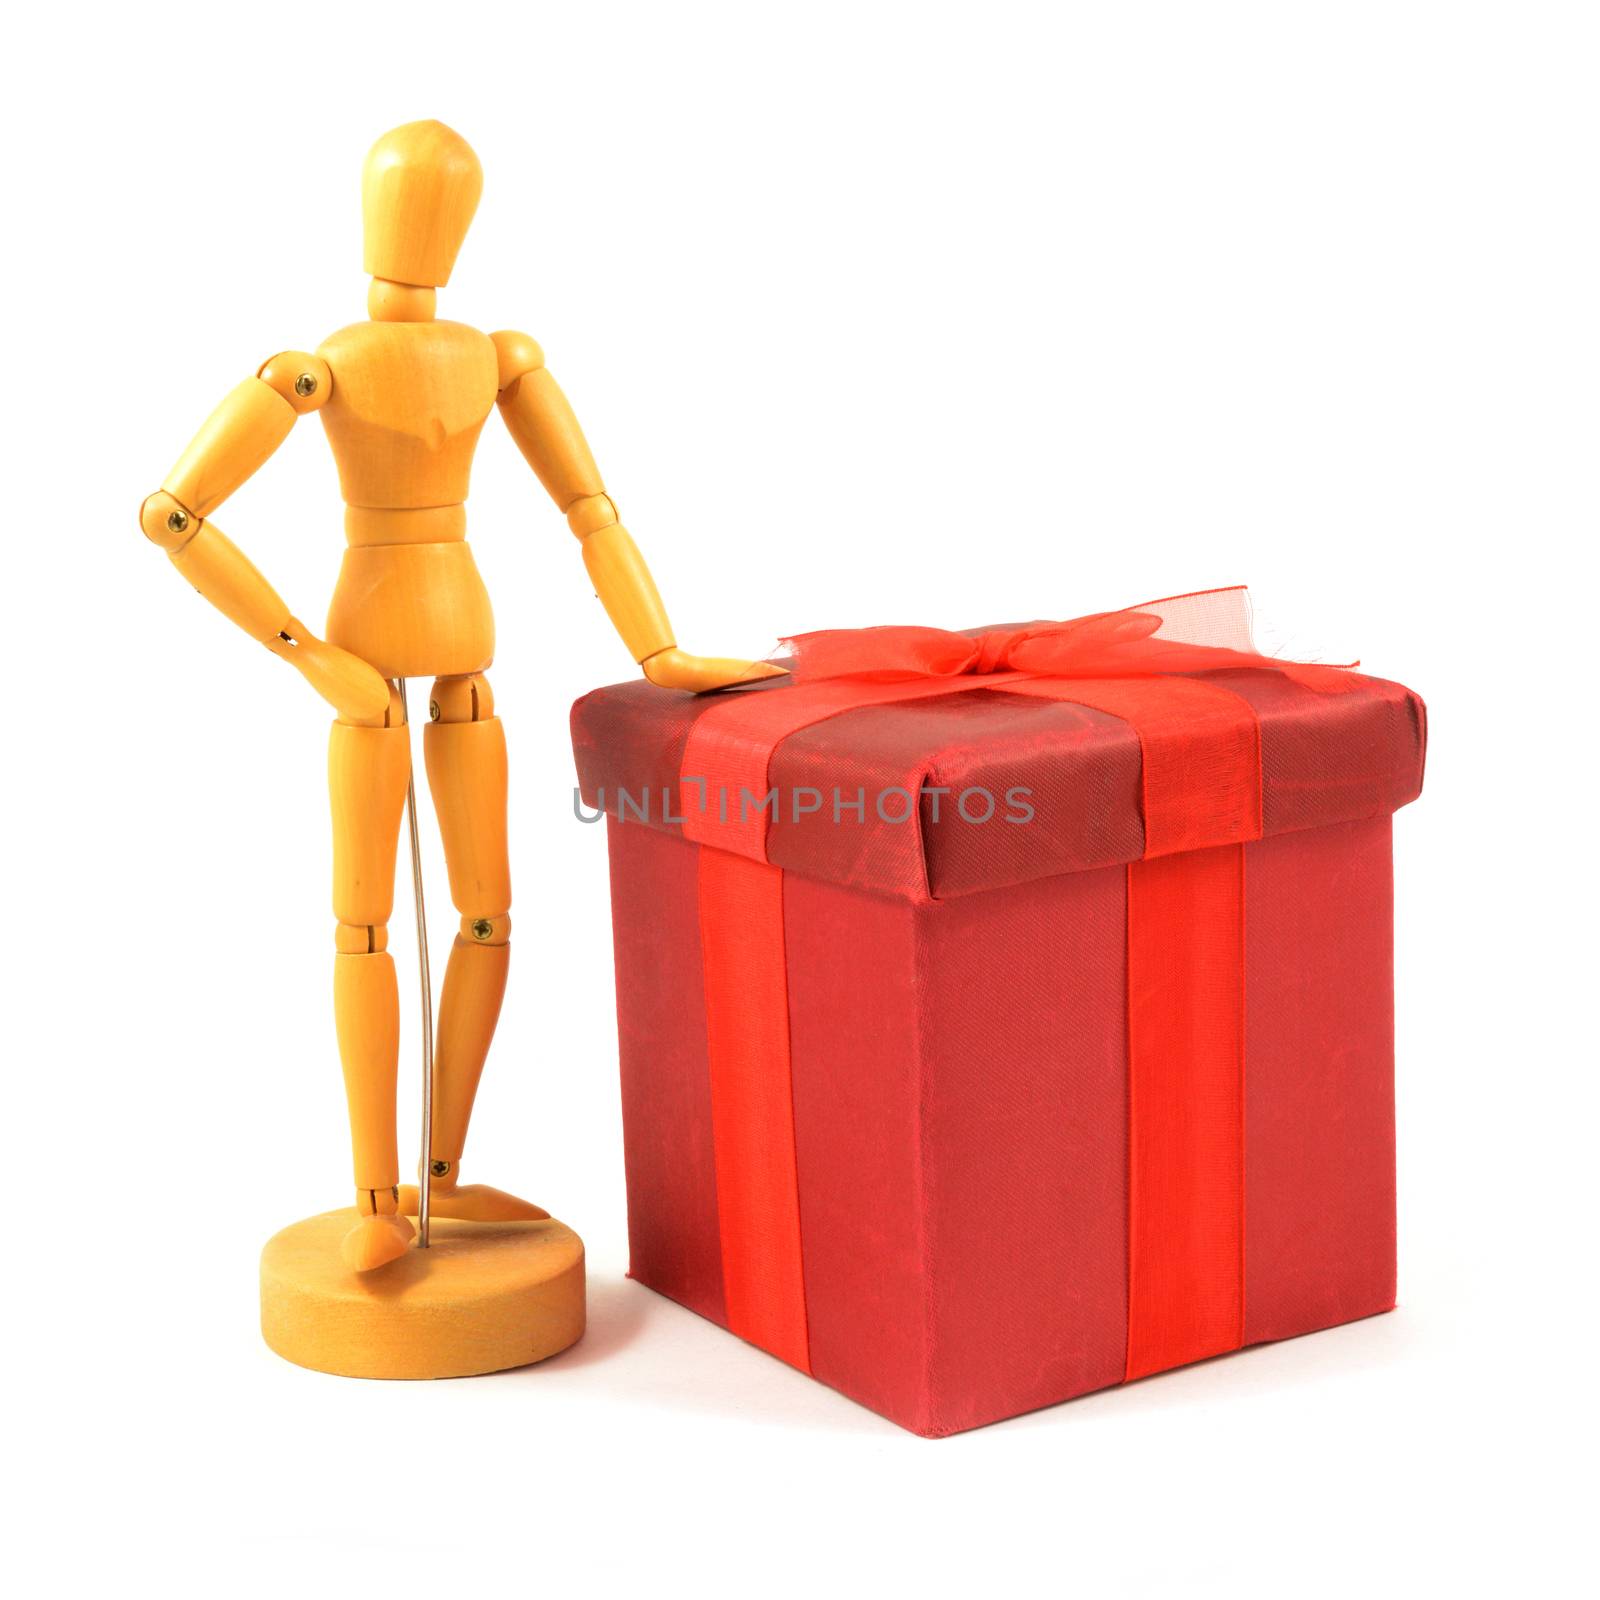 An isolated over a white background image of a wood artists figurine and a red gift box wrapped in ribbon.